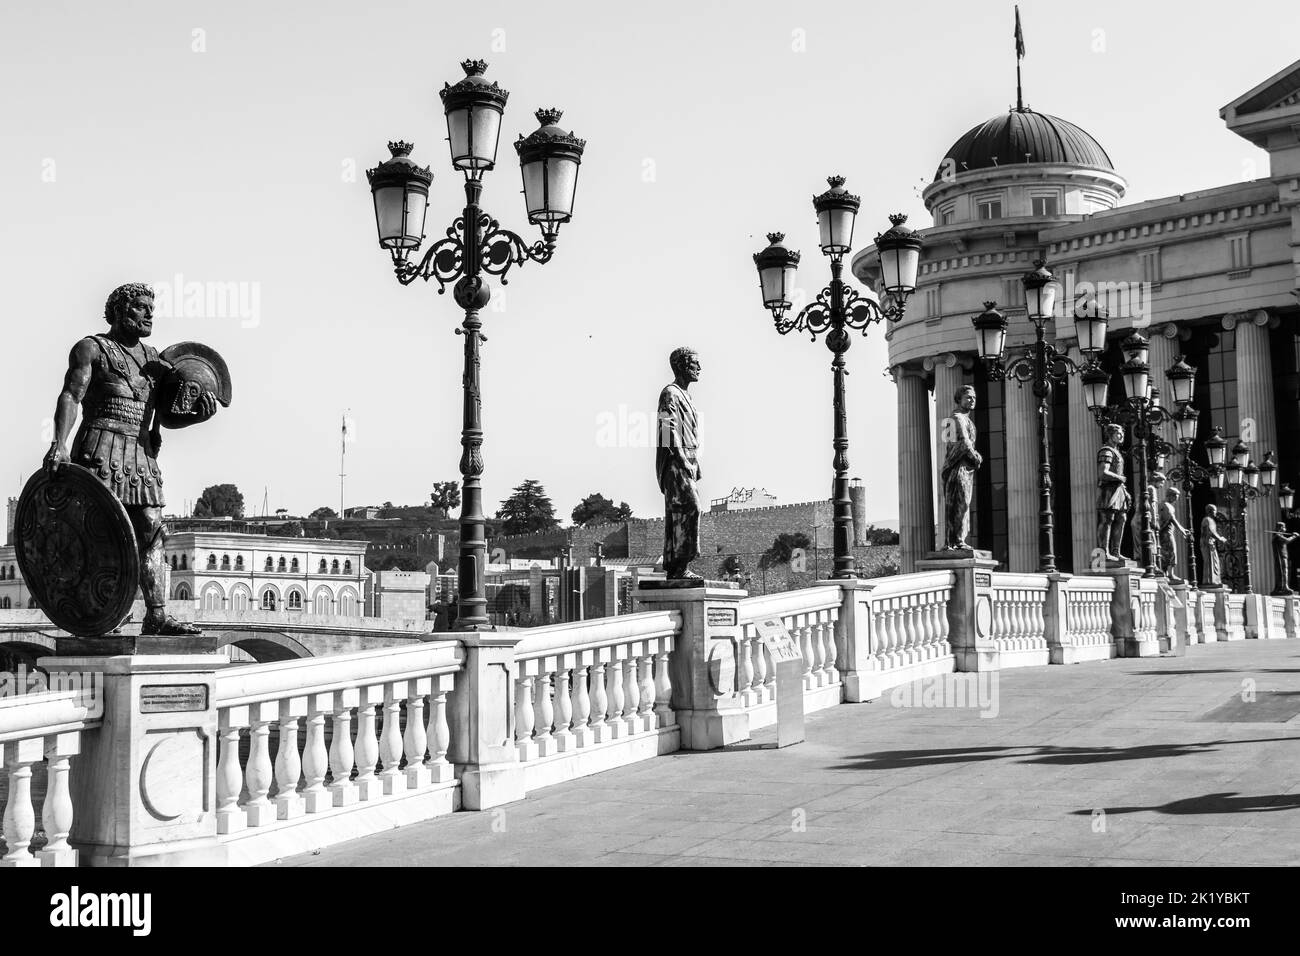 Statues decorating the Bridge of Civilisations, in front of Archaeology Museum, Skopje, North Macedonia. Bridge crossing the Vardar River, in summer. Stock Photo